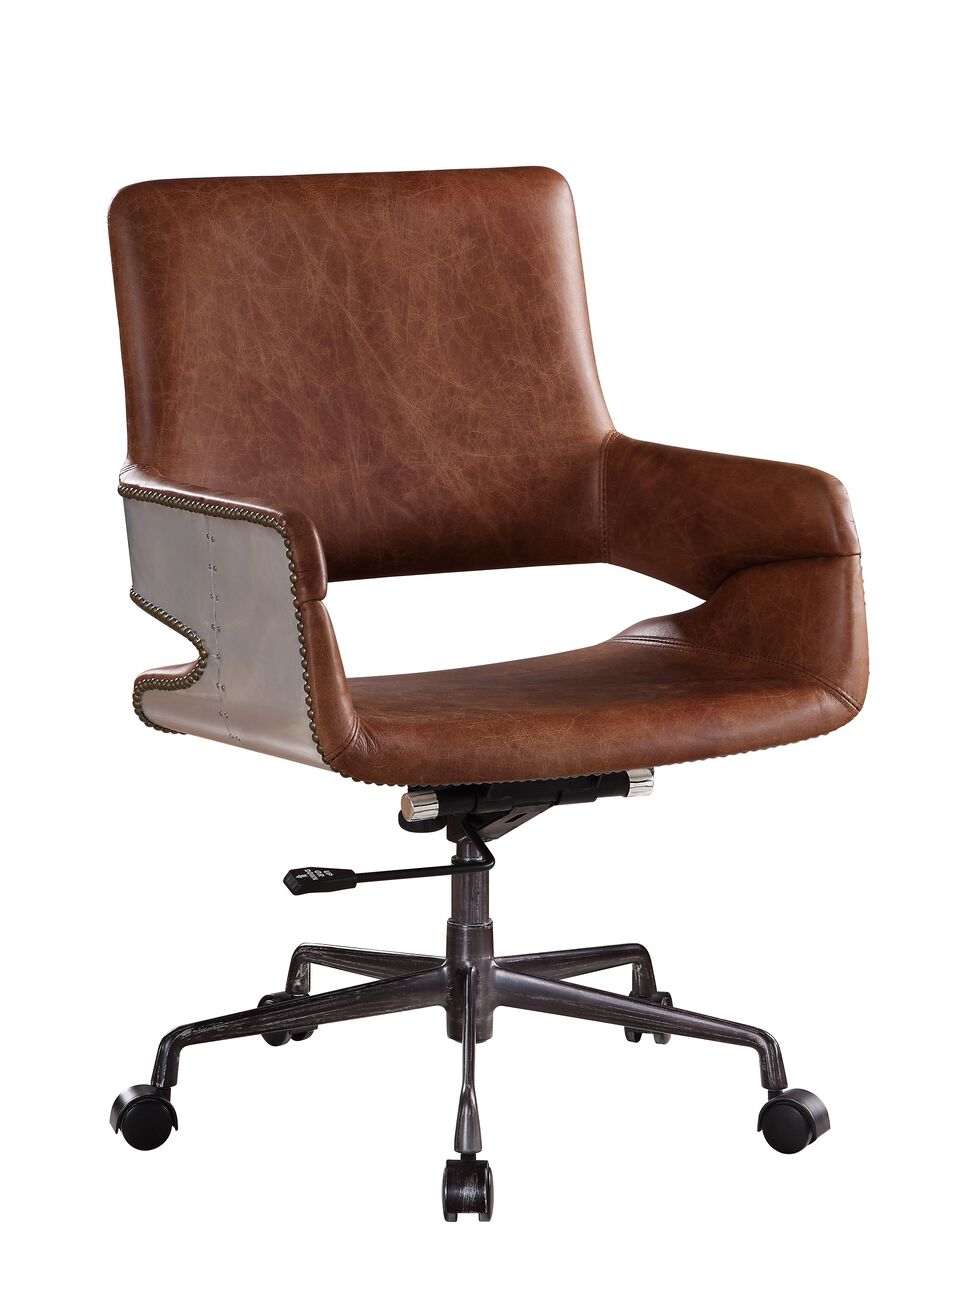 Faux Leather Upholstered Wooden Office Chair with Lift Mechanism,Brown